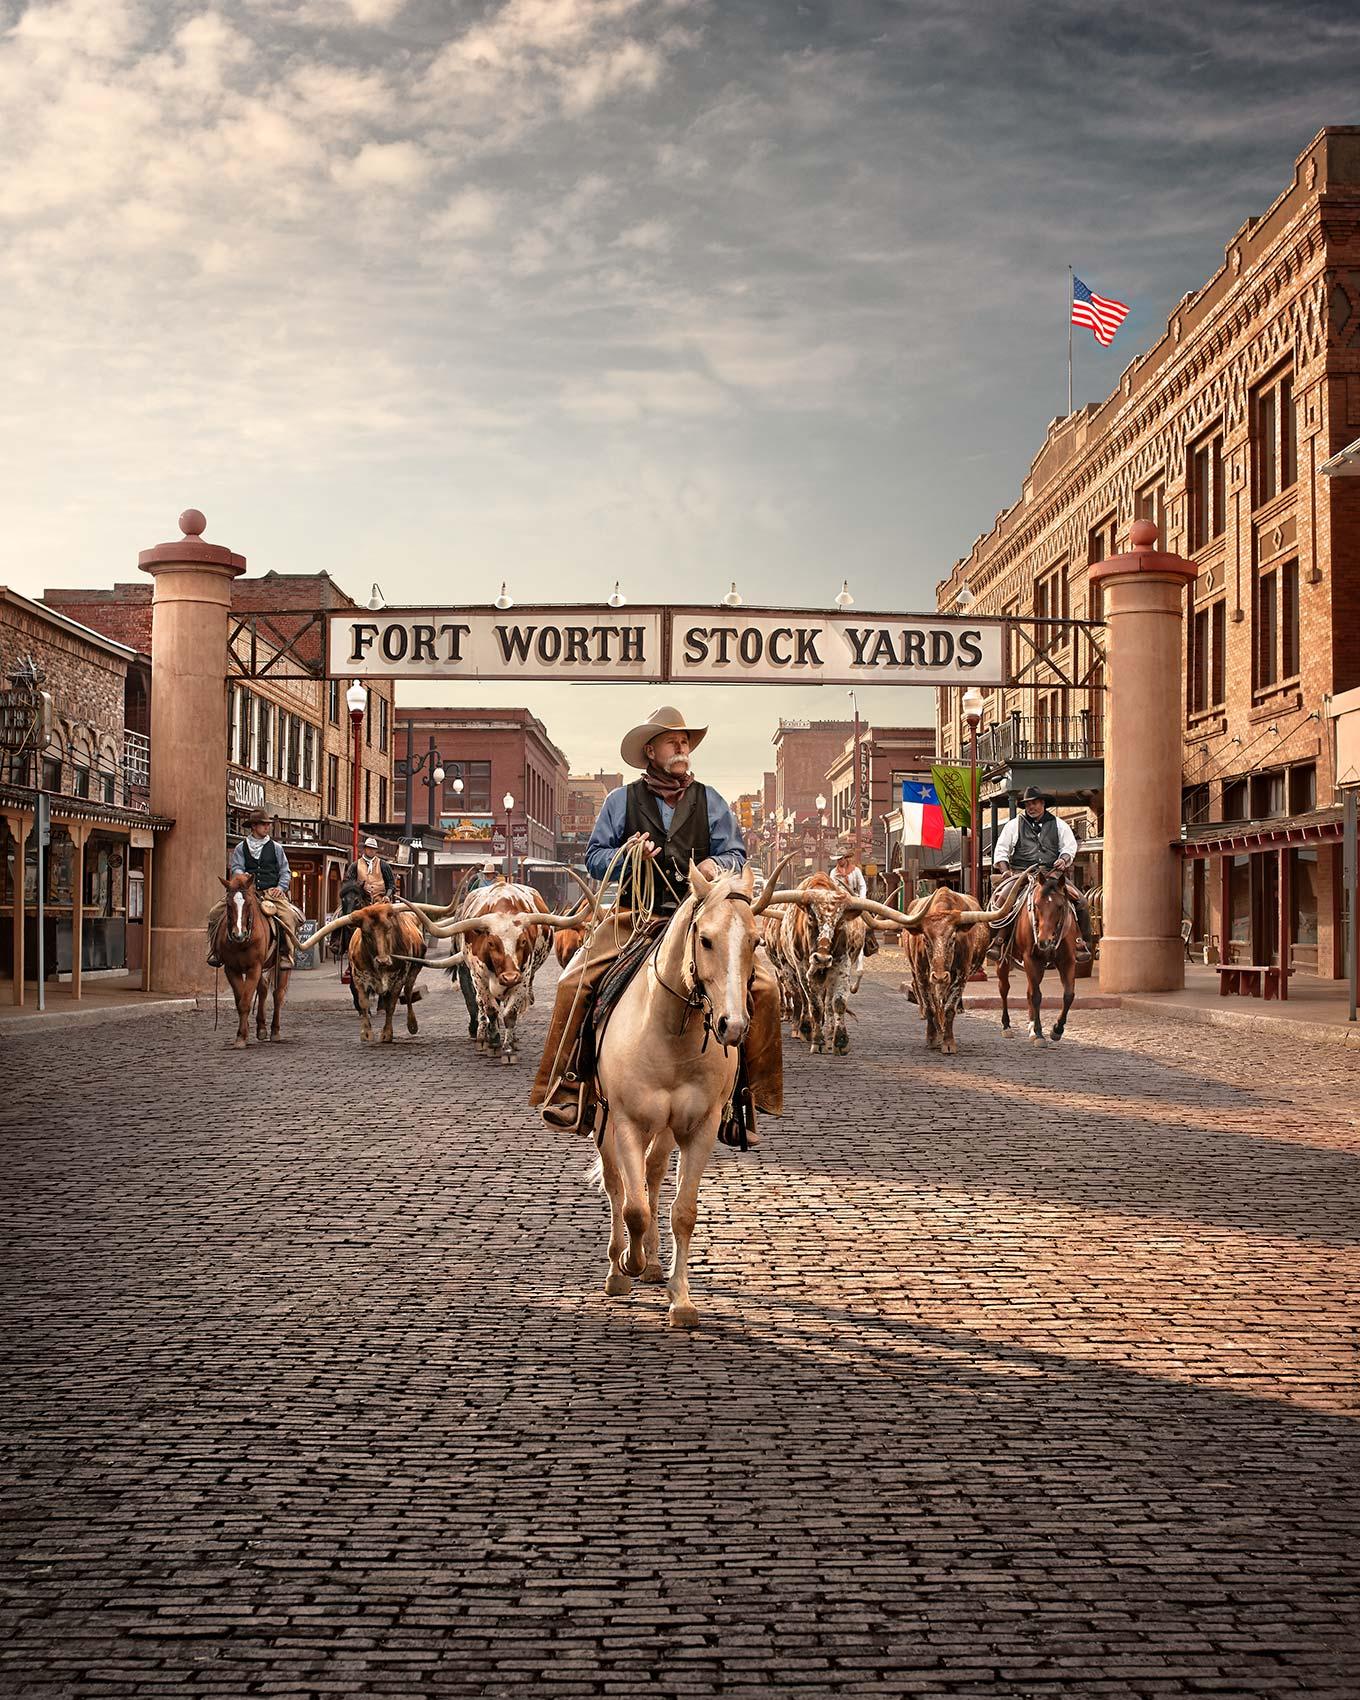 Title: The Great Homecoming at the Fort Worth Stockyards
Available Sizes:

30" x 37.5" - Edition of 15
40" x 50"   - Edition of 10
48" x 60"   - Edition of 5

This photograph will be printed once payment has been received and will ship directly from